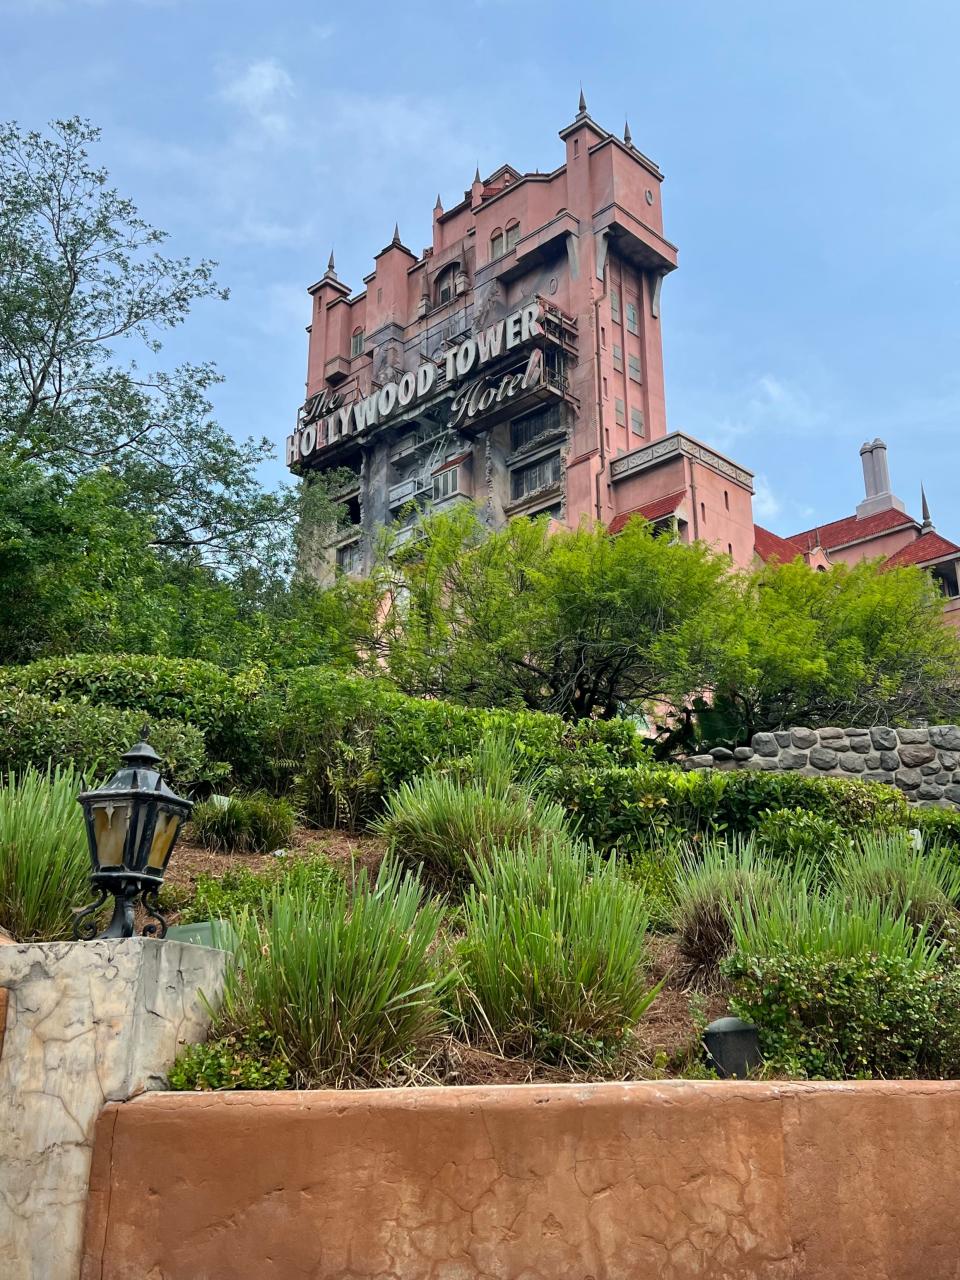 The Twilight Zone Tower of Terror remains one of the most popular rides at Disney's Hollywood Studios.